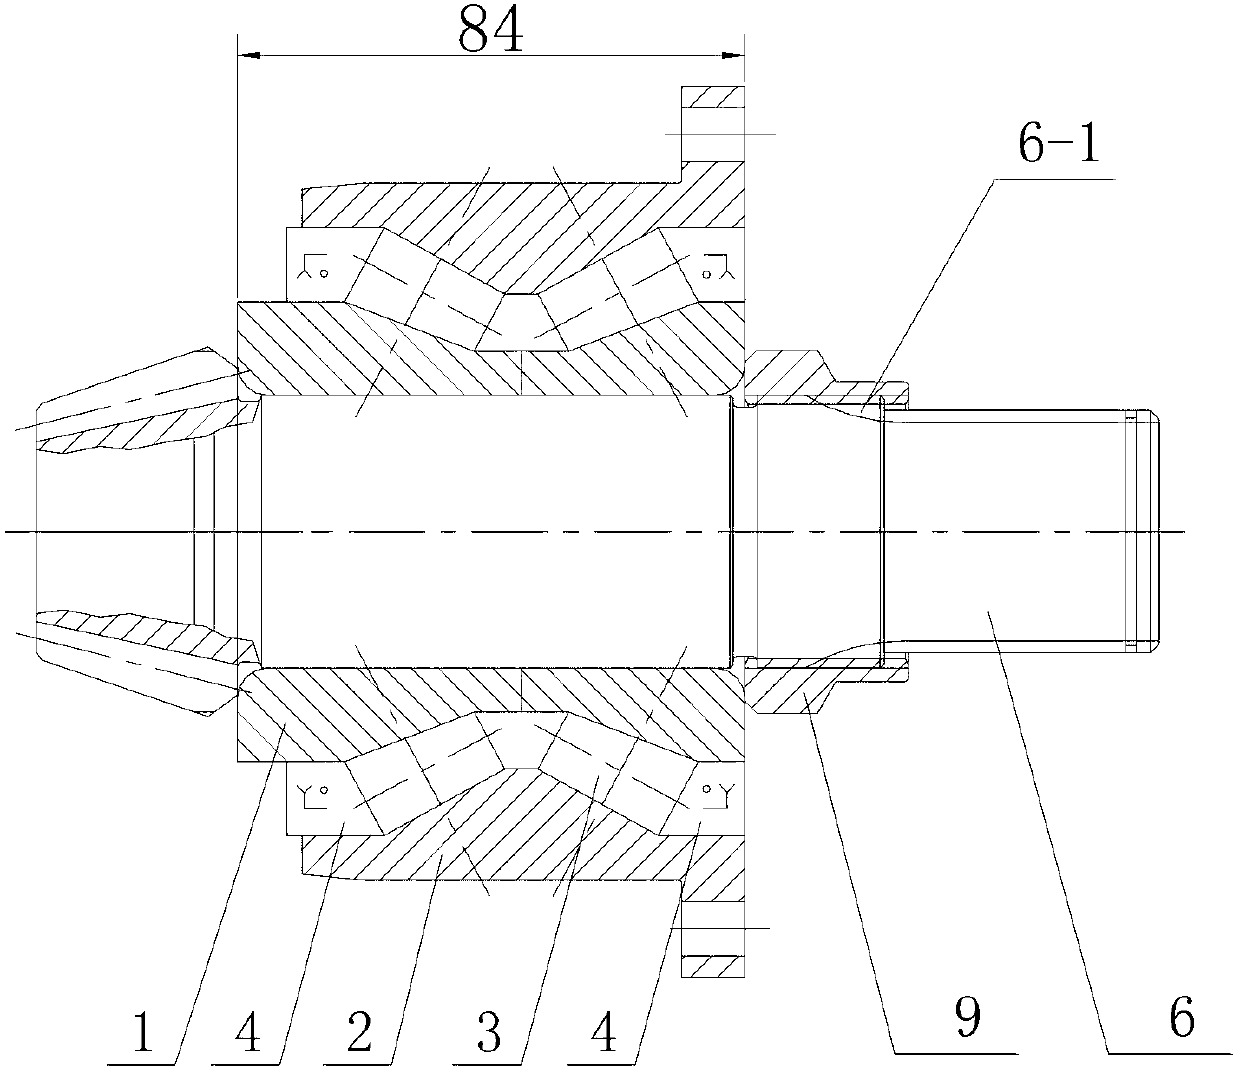 Bearing unit for supporting transmission shaft and gear reducer